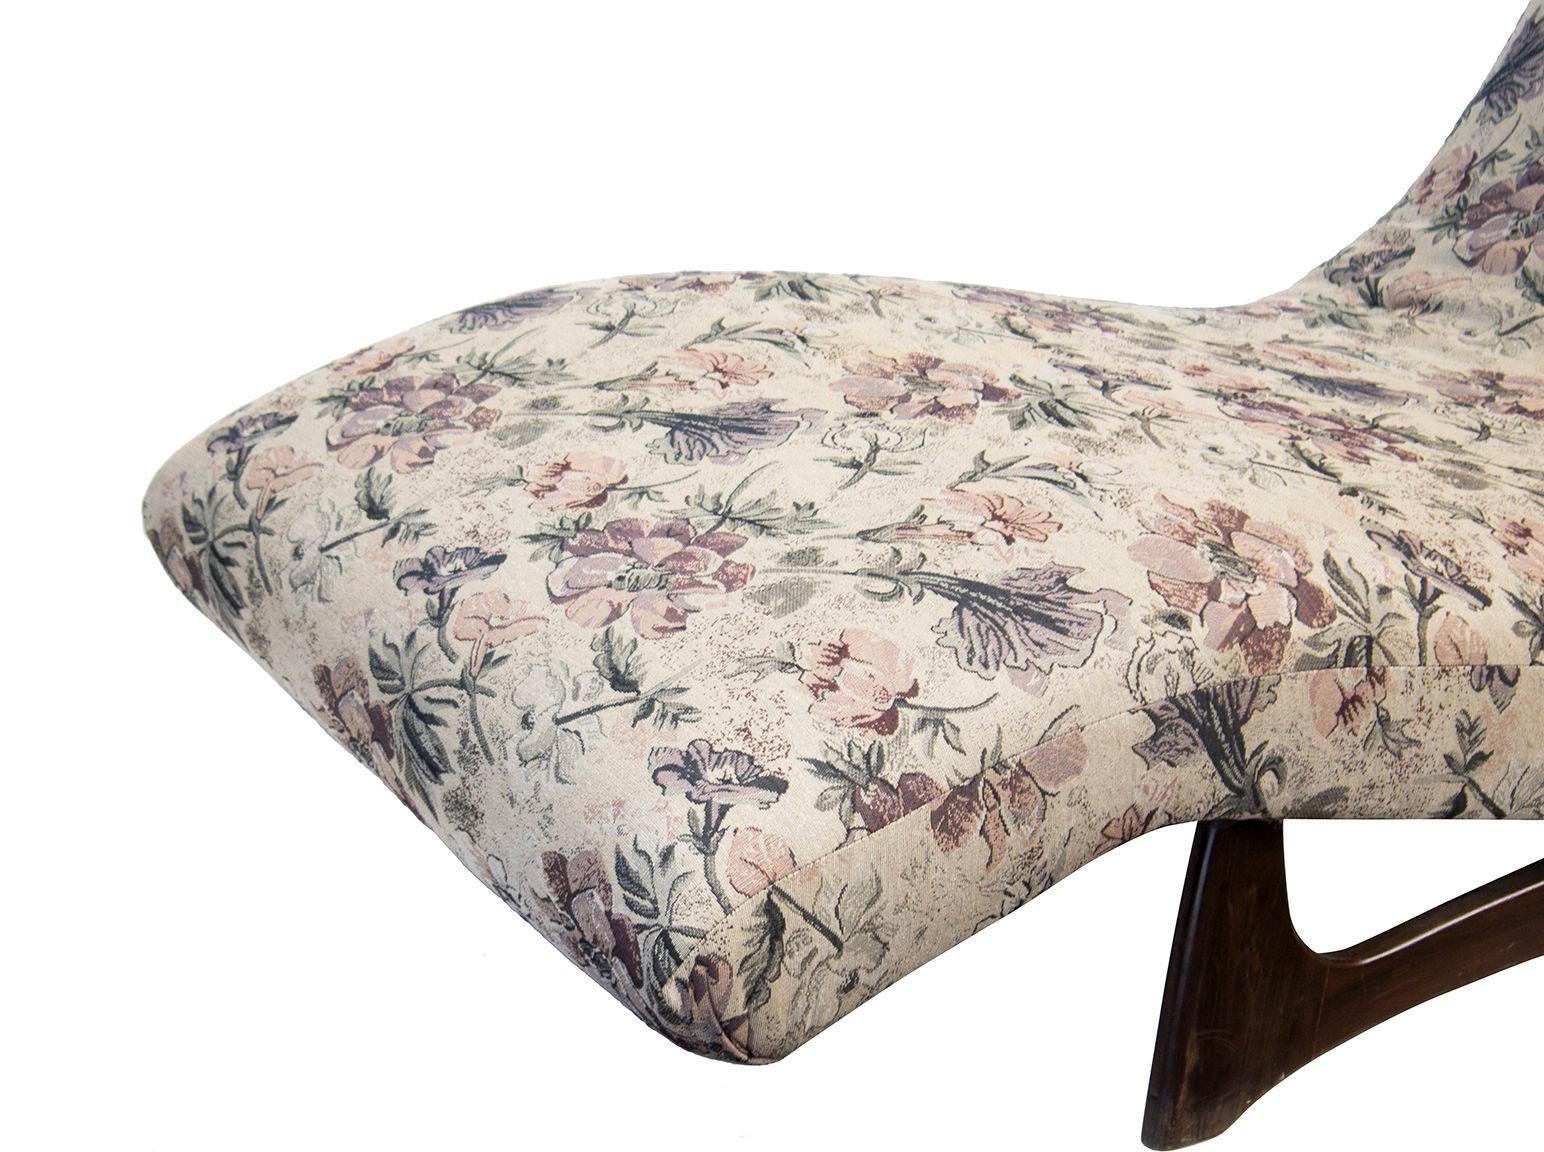 Fabric Midcentury Modern Wave Chaise by Adrian Pearsall for Craft Associates